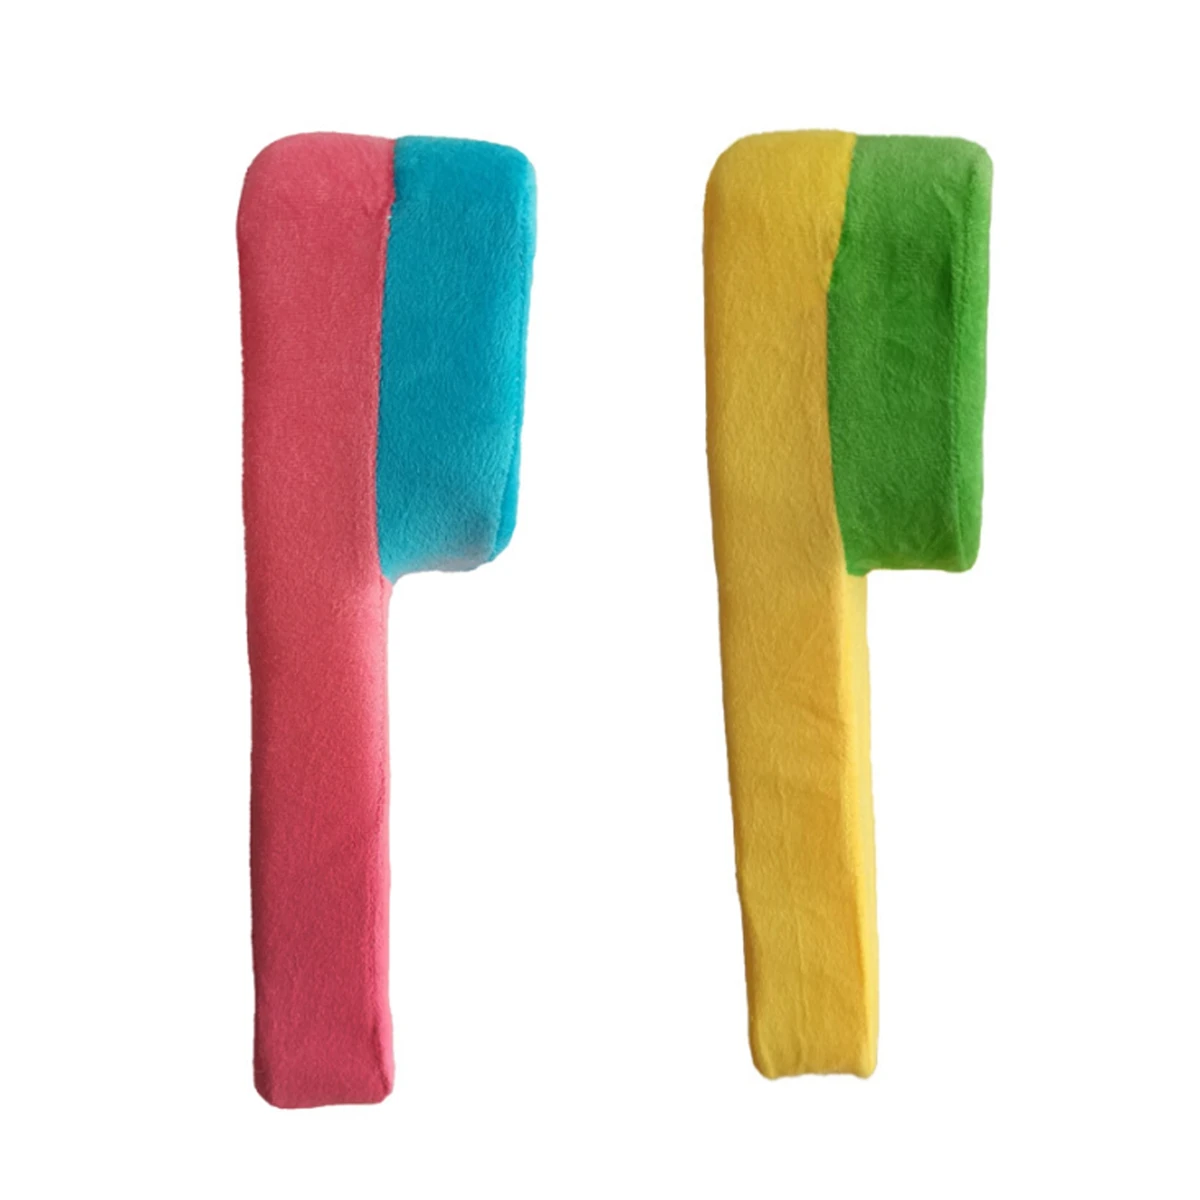 

2 Pieces of Toothbrush Props for Children's Photography Kindergarten Tooth Brushing Show Tooth Battle Big Toothbrush